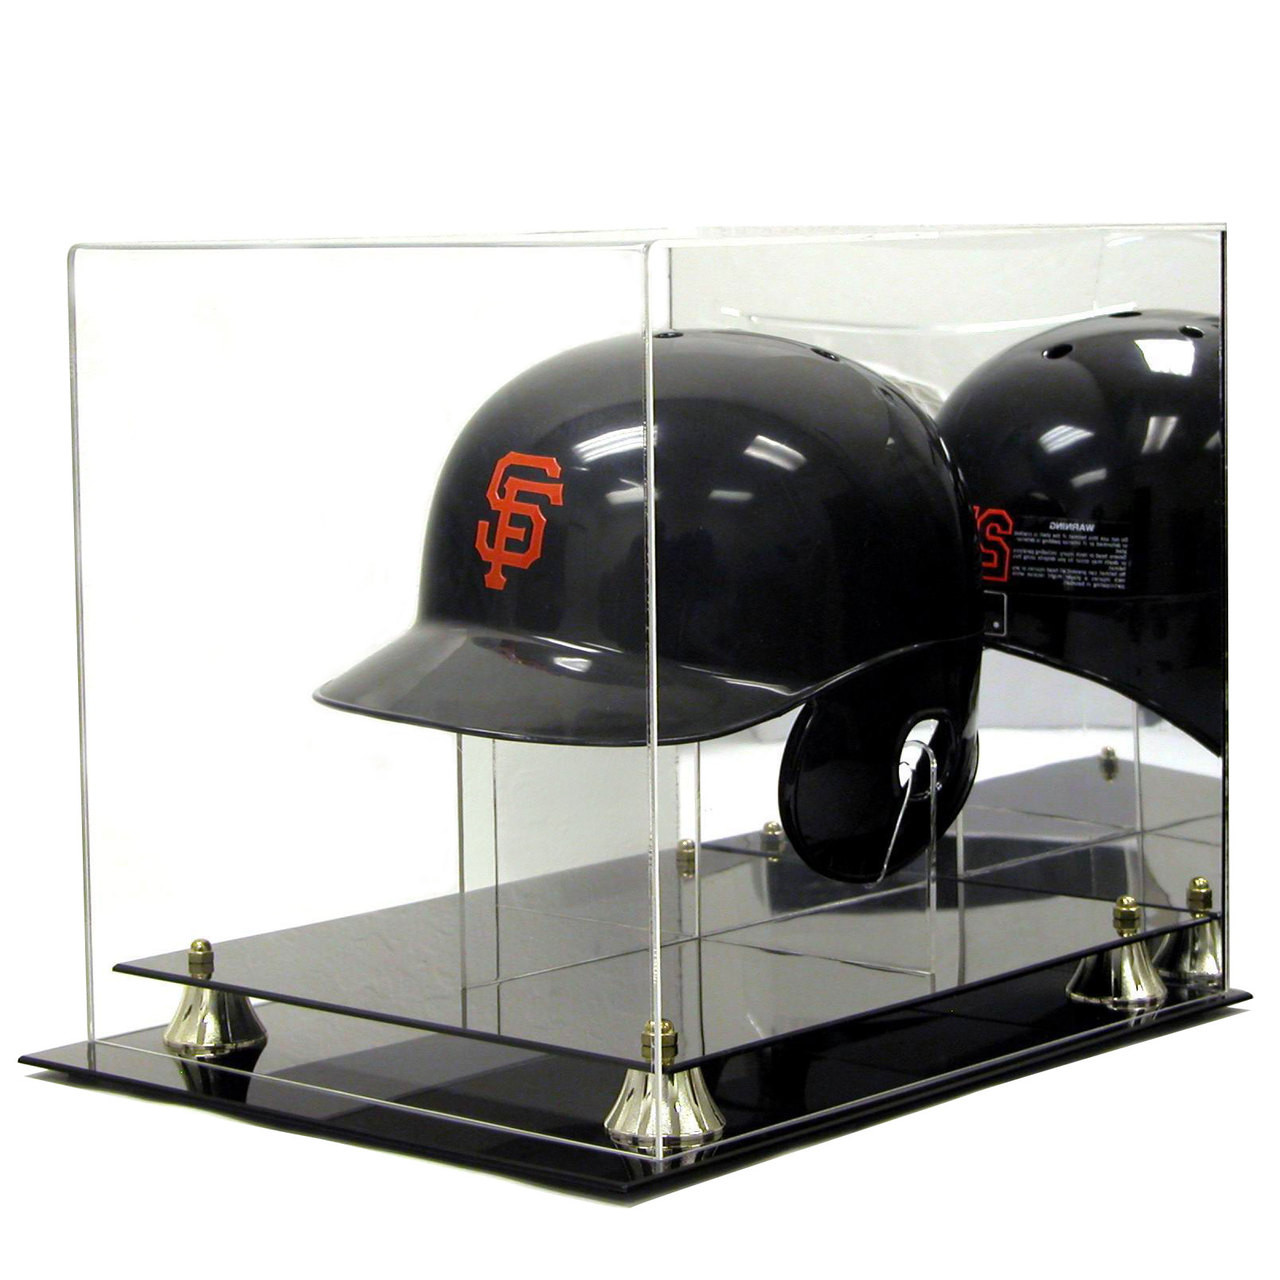 Deluxe Acrylic Baseball Helmet Display Case W Stand Out Of Stock Polynex Inc